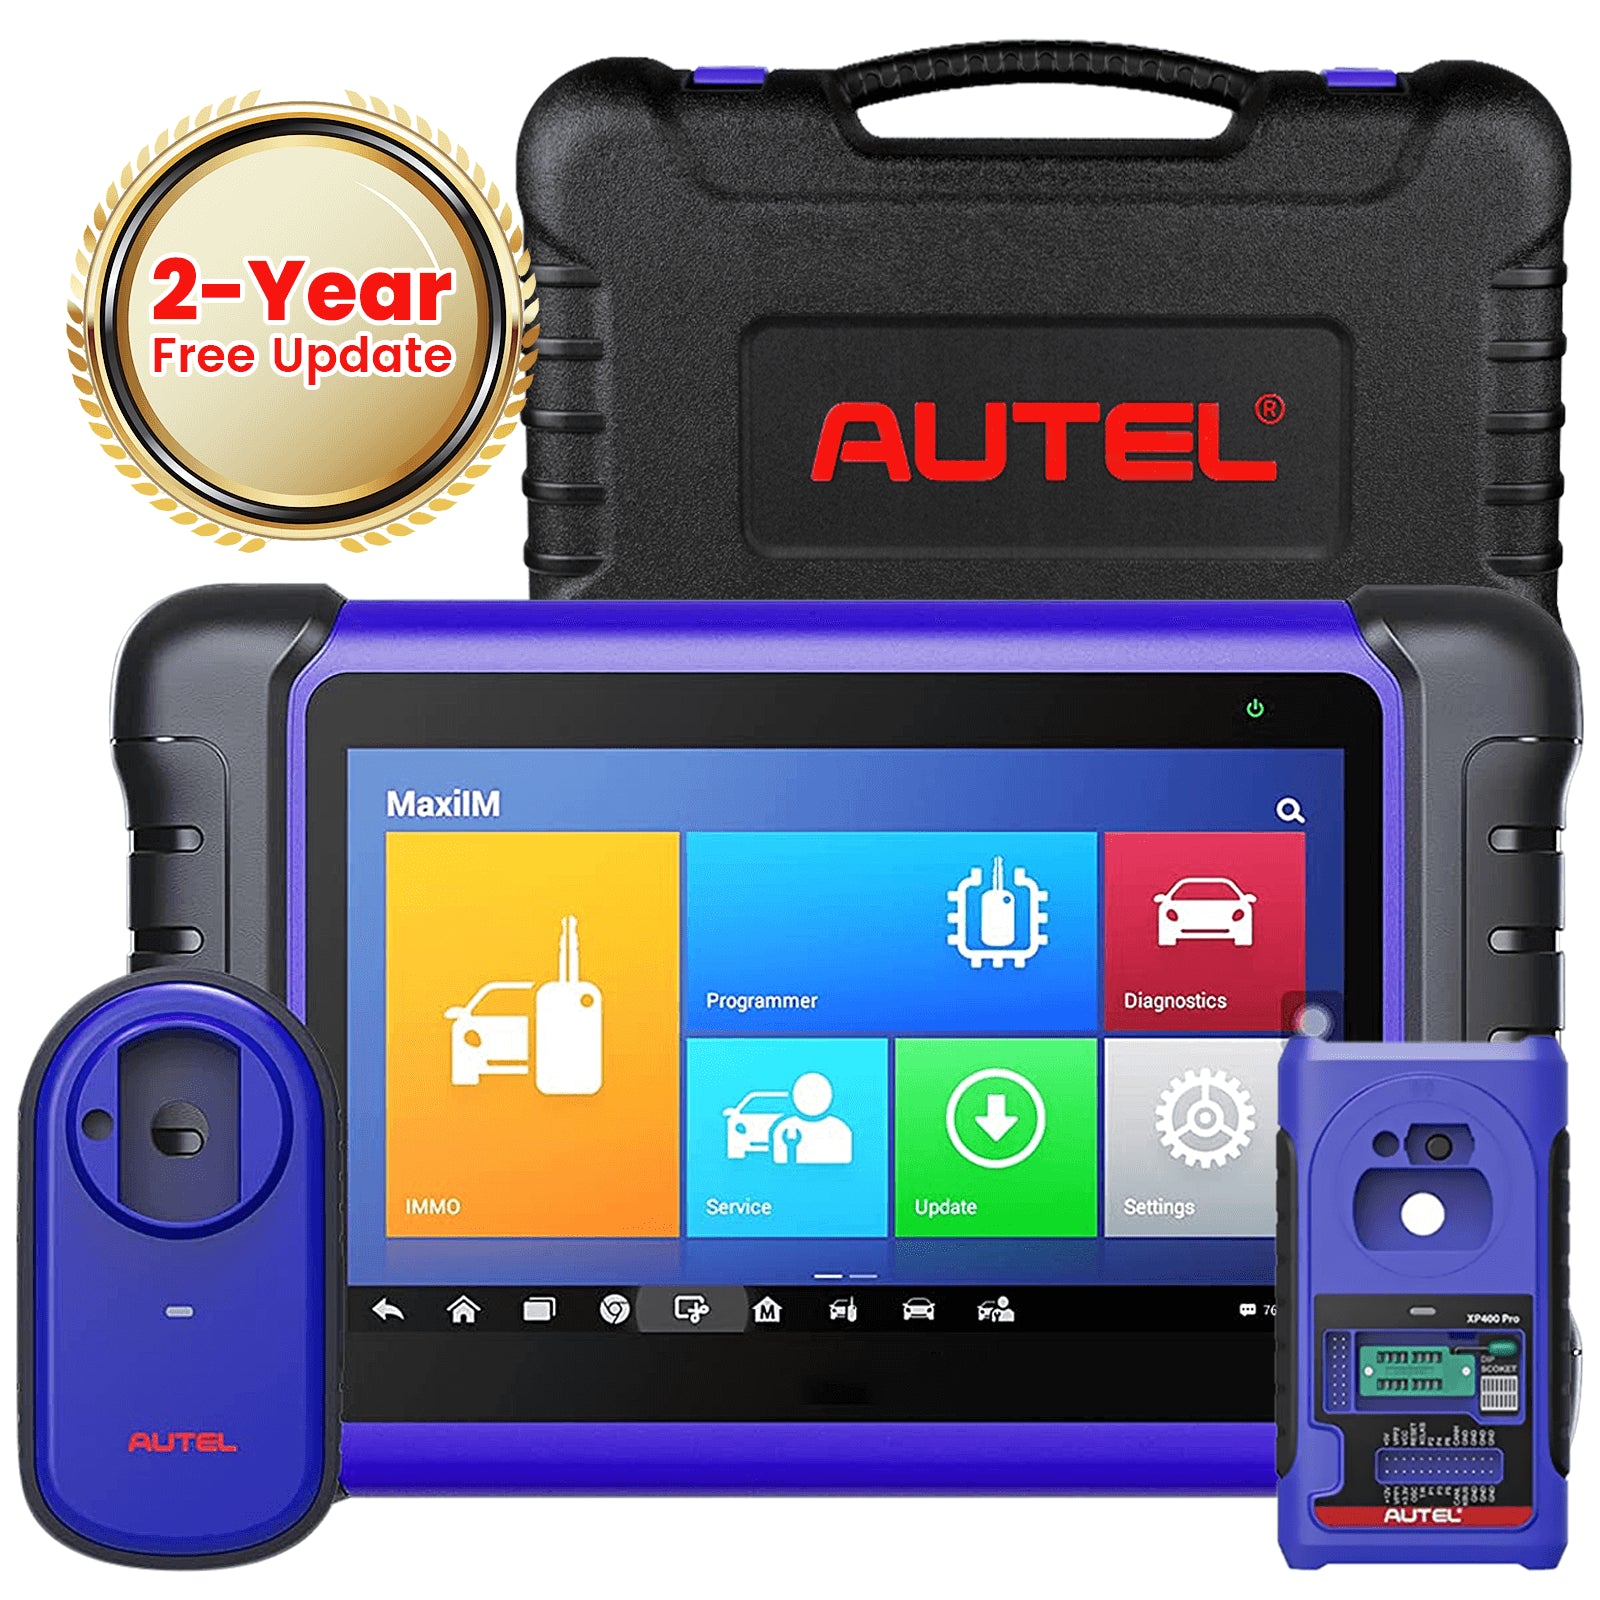 Autel IM508 Professional Key FOB Programming Tool with XP200 Programmer, Car Diagnostic Scan Tool with All System Diagnostics, ABS Bleed/ Oil Reset/ EPB/ DPF/ SAS/ BMS for Workshops/ DIYERS